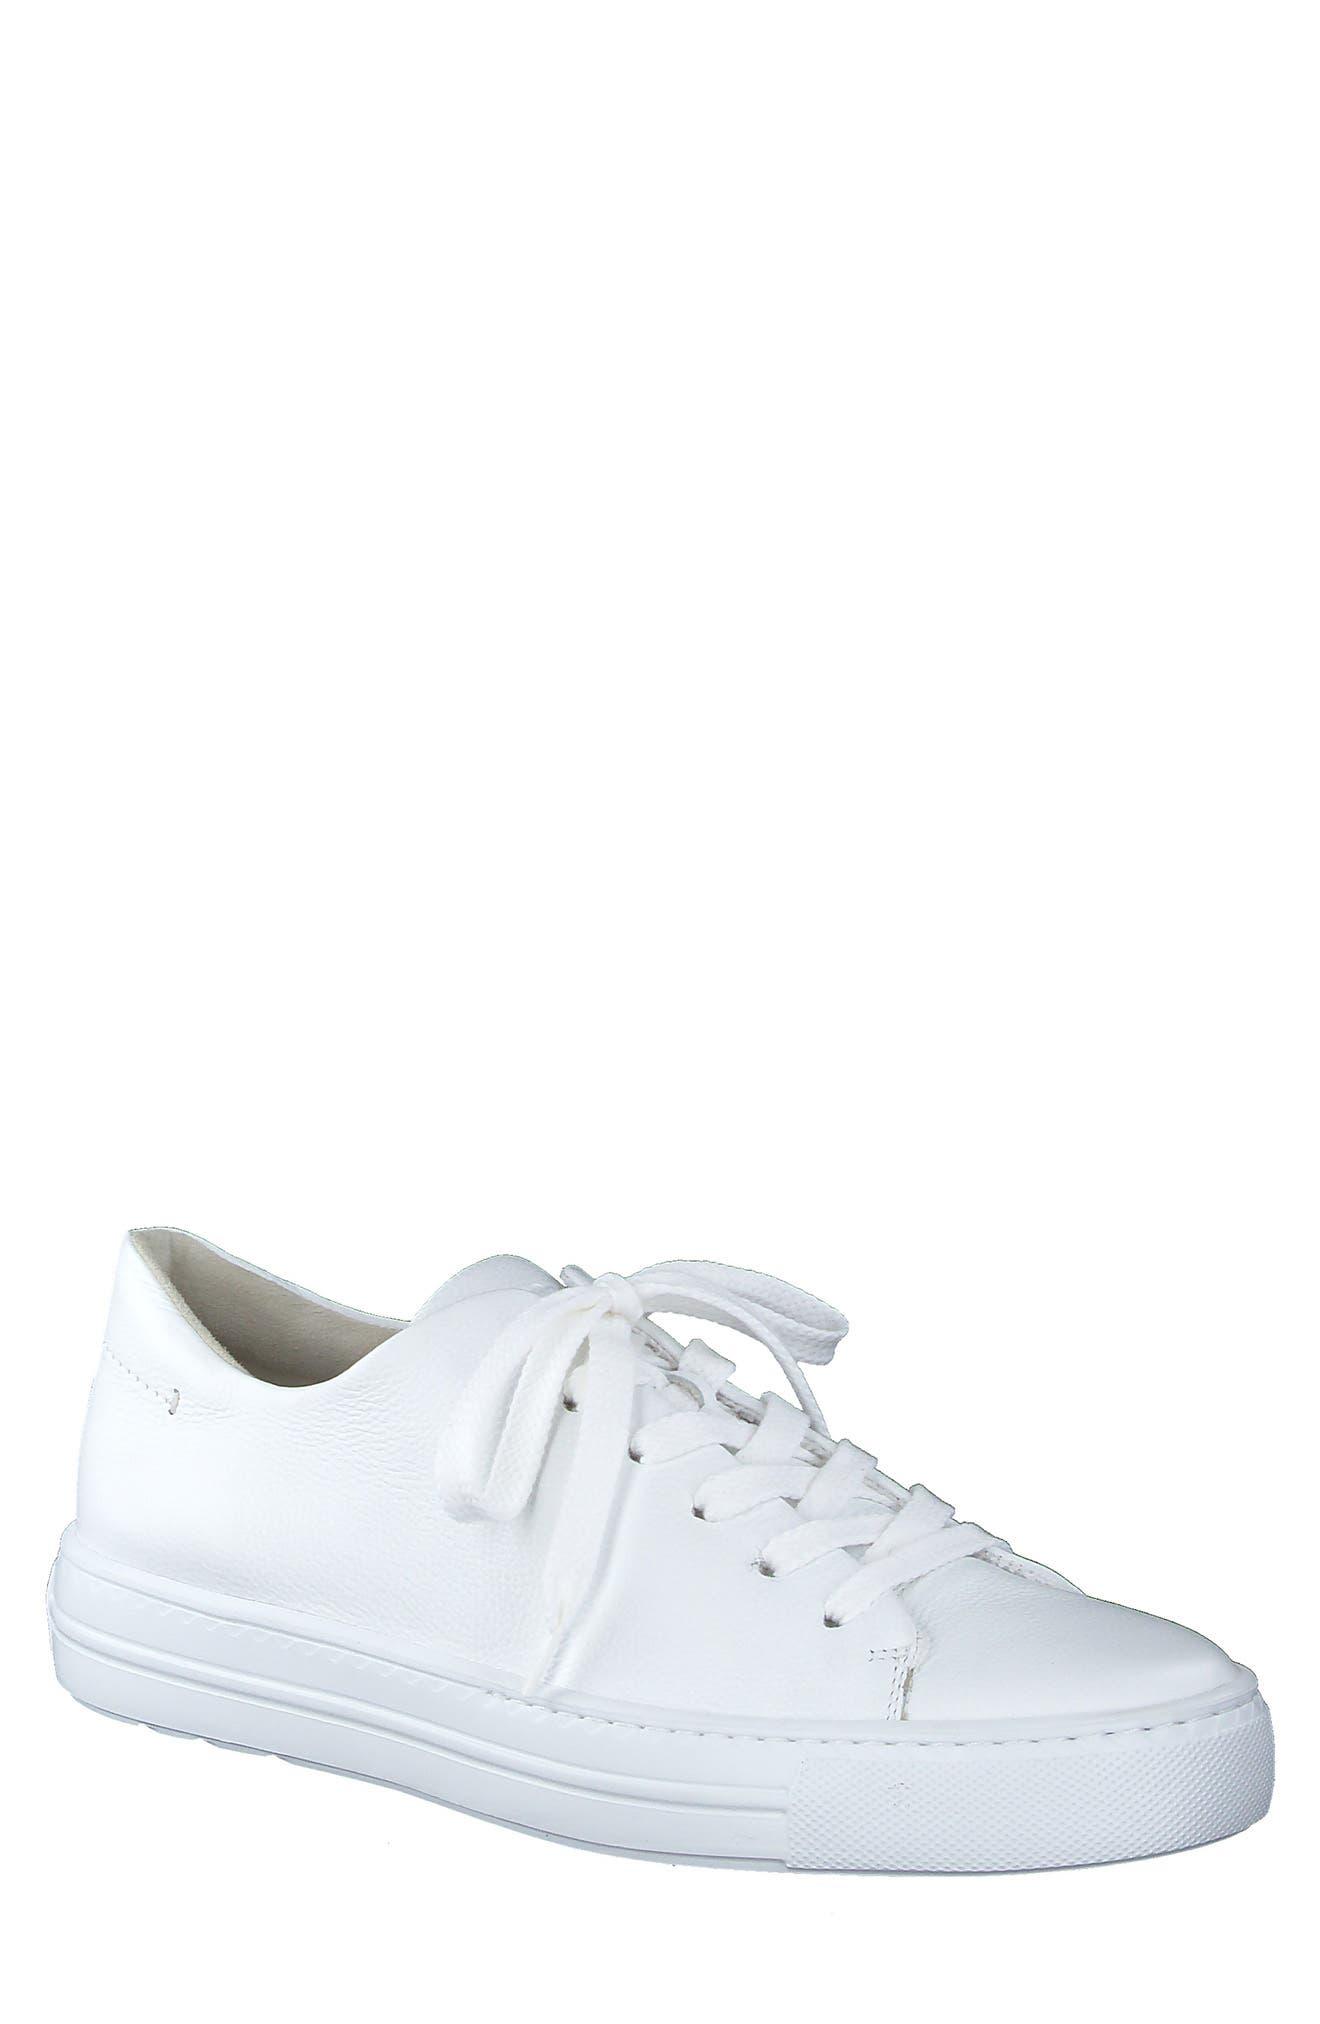 White Leather Casual Shoes - Buy White Leather Casual Shoes online in India